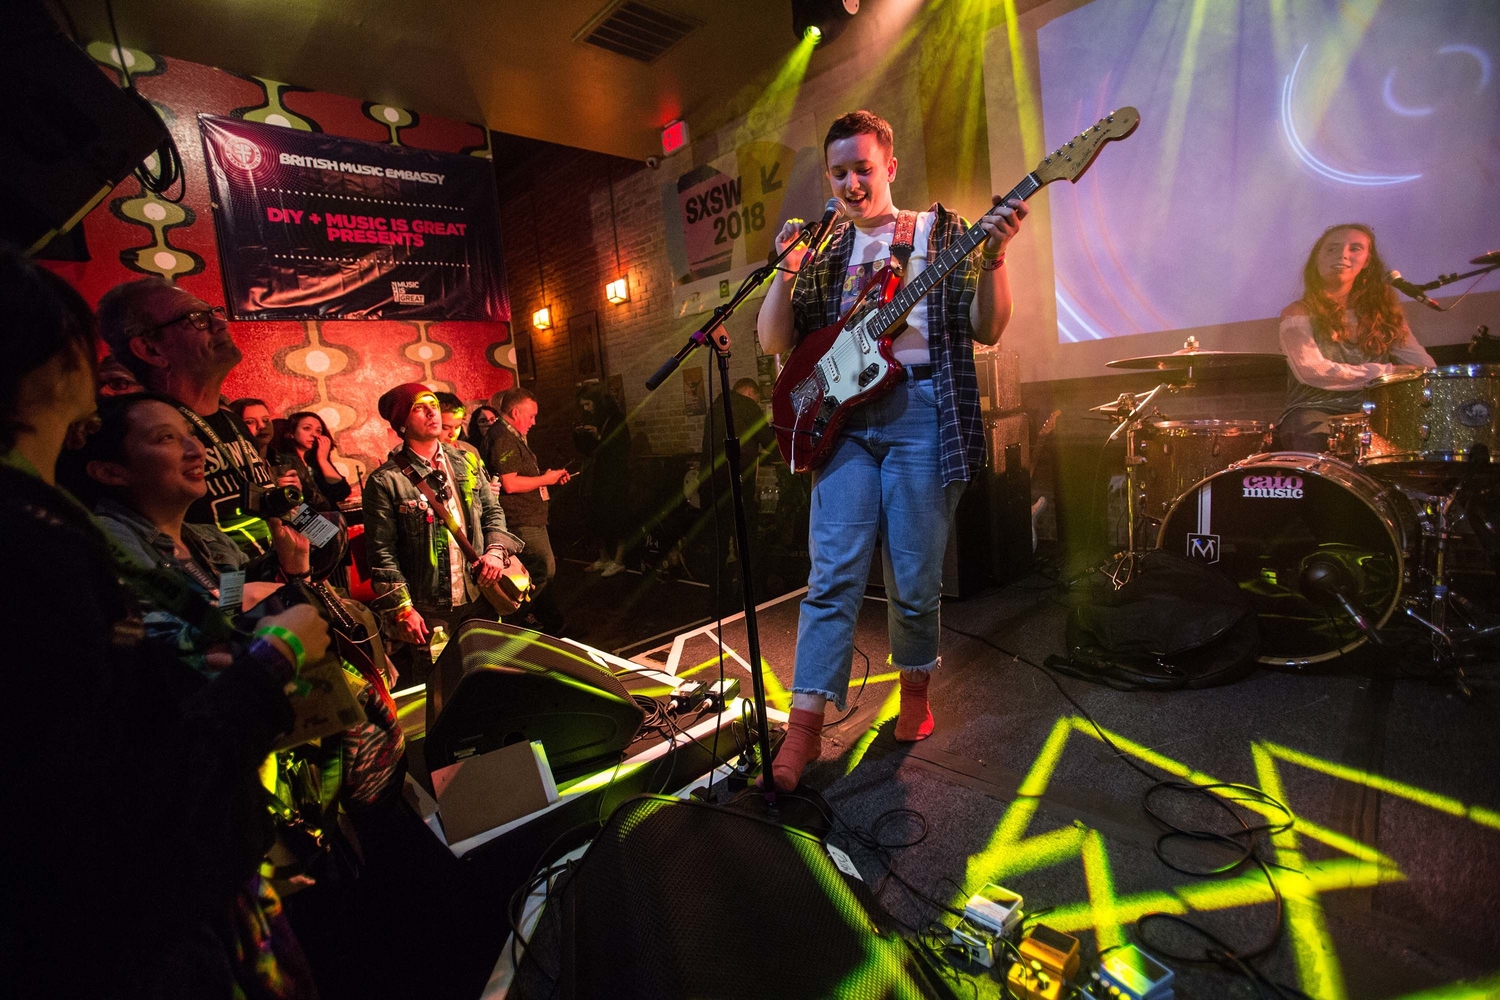 LIFE, Our Girl & Francobollo lead the charge on DIY's SXSW stage at the British Music Embassy